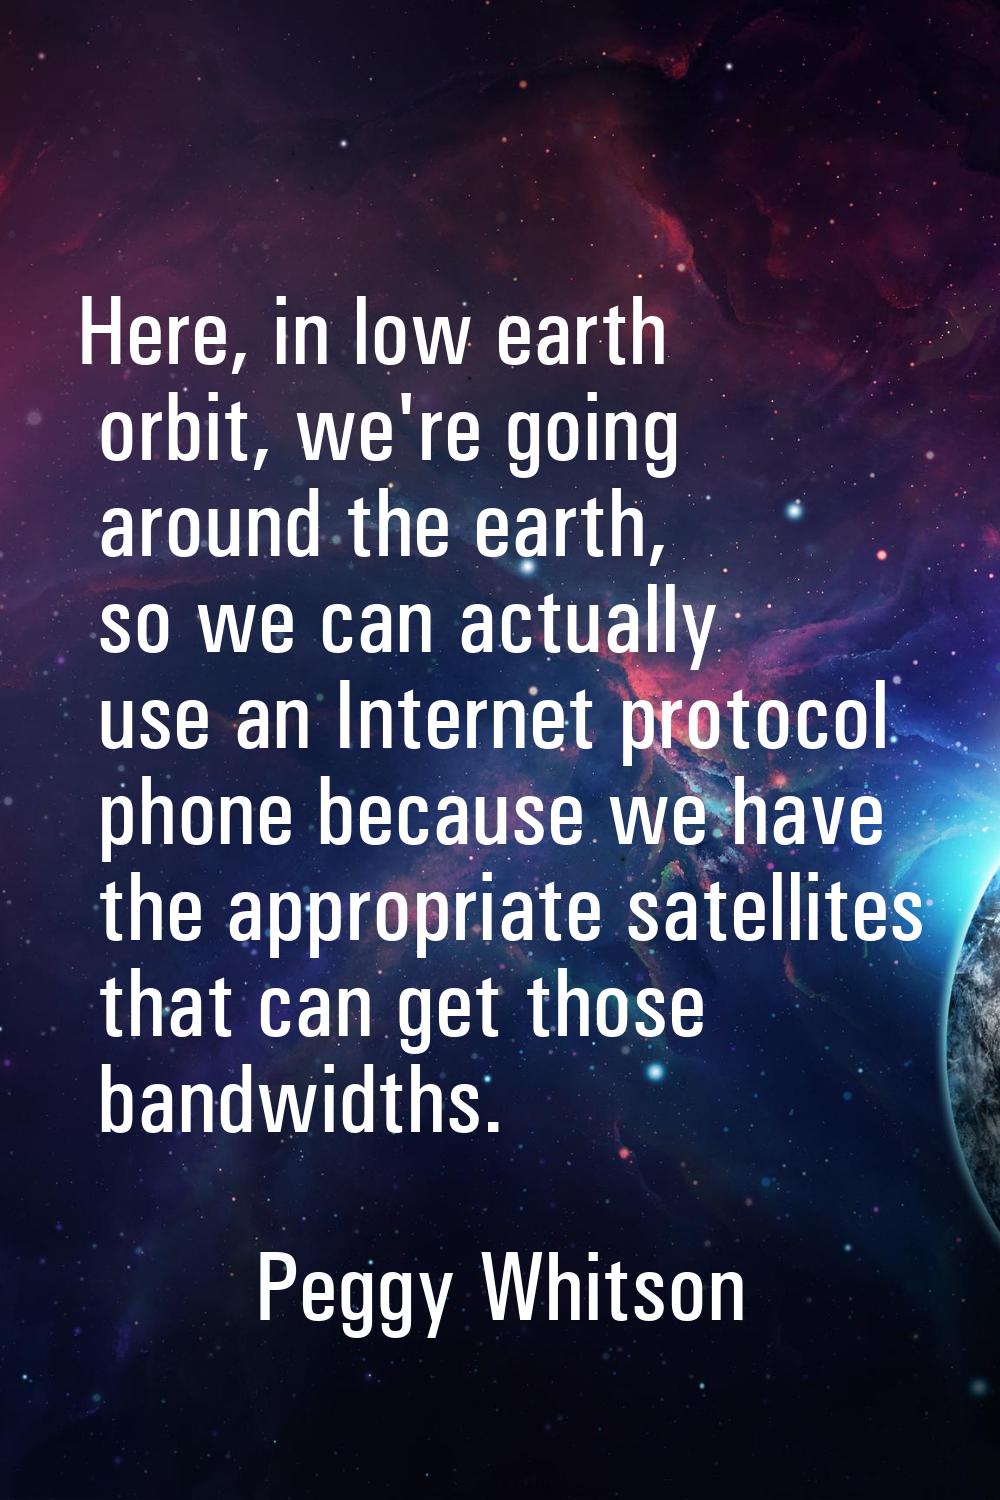 Here, in low earth orbit, we're going around the earth, so we can actually use an Internet protocol